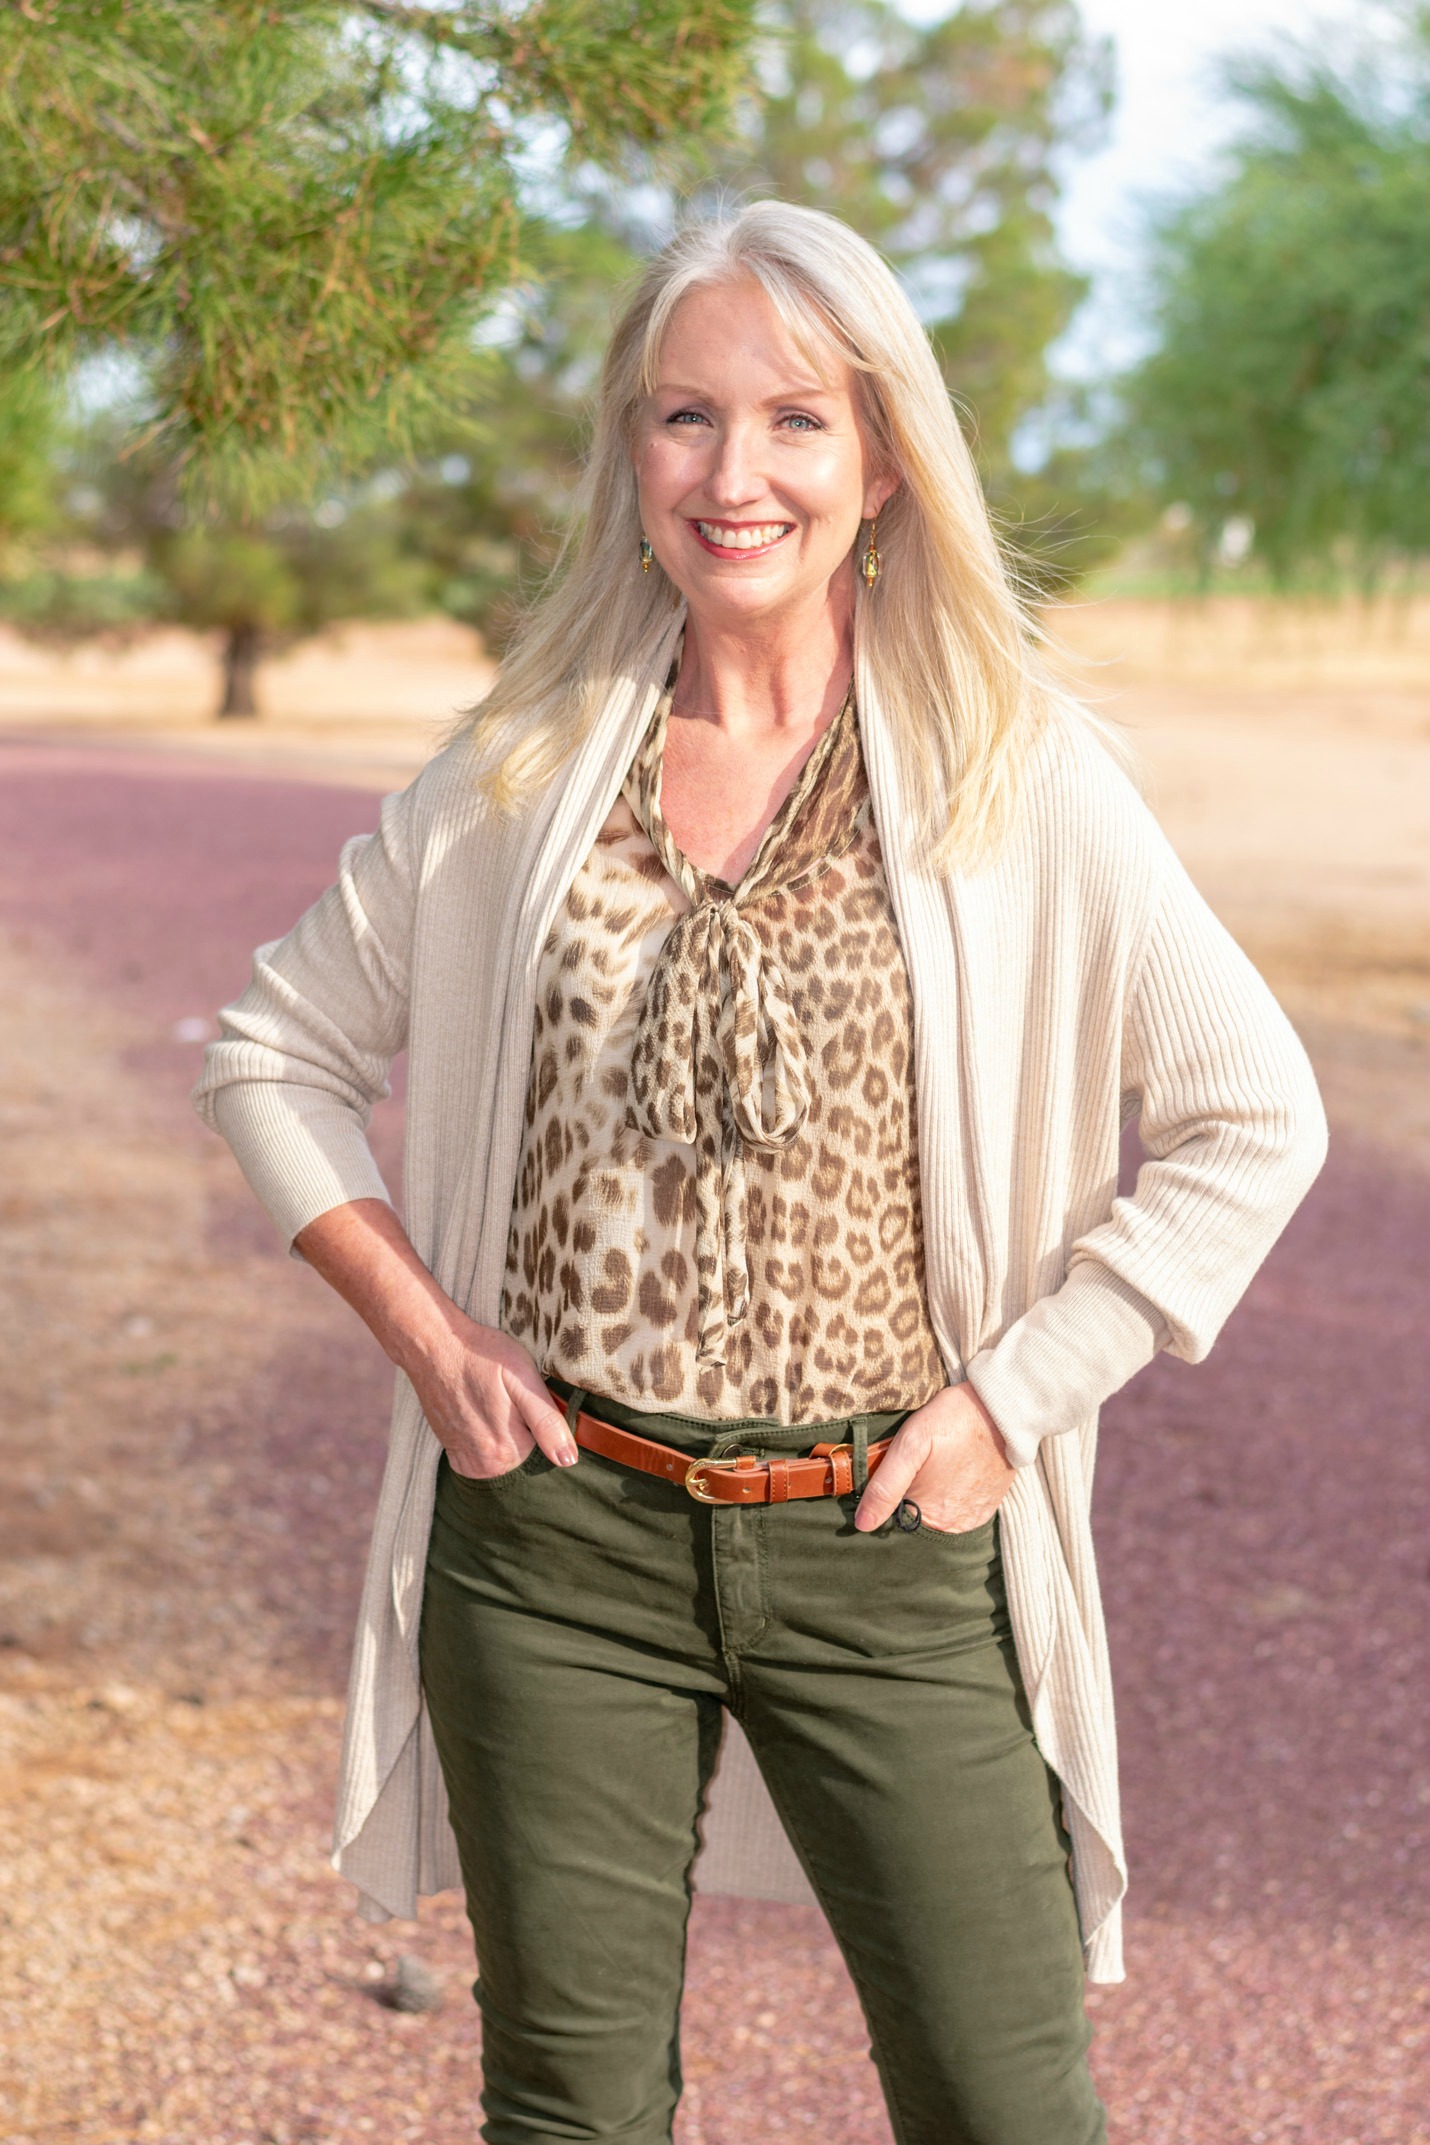 Colored Jeans and Leopard Print Blouse